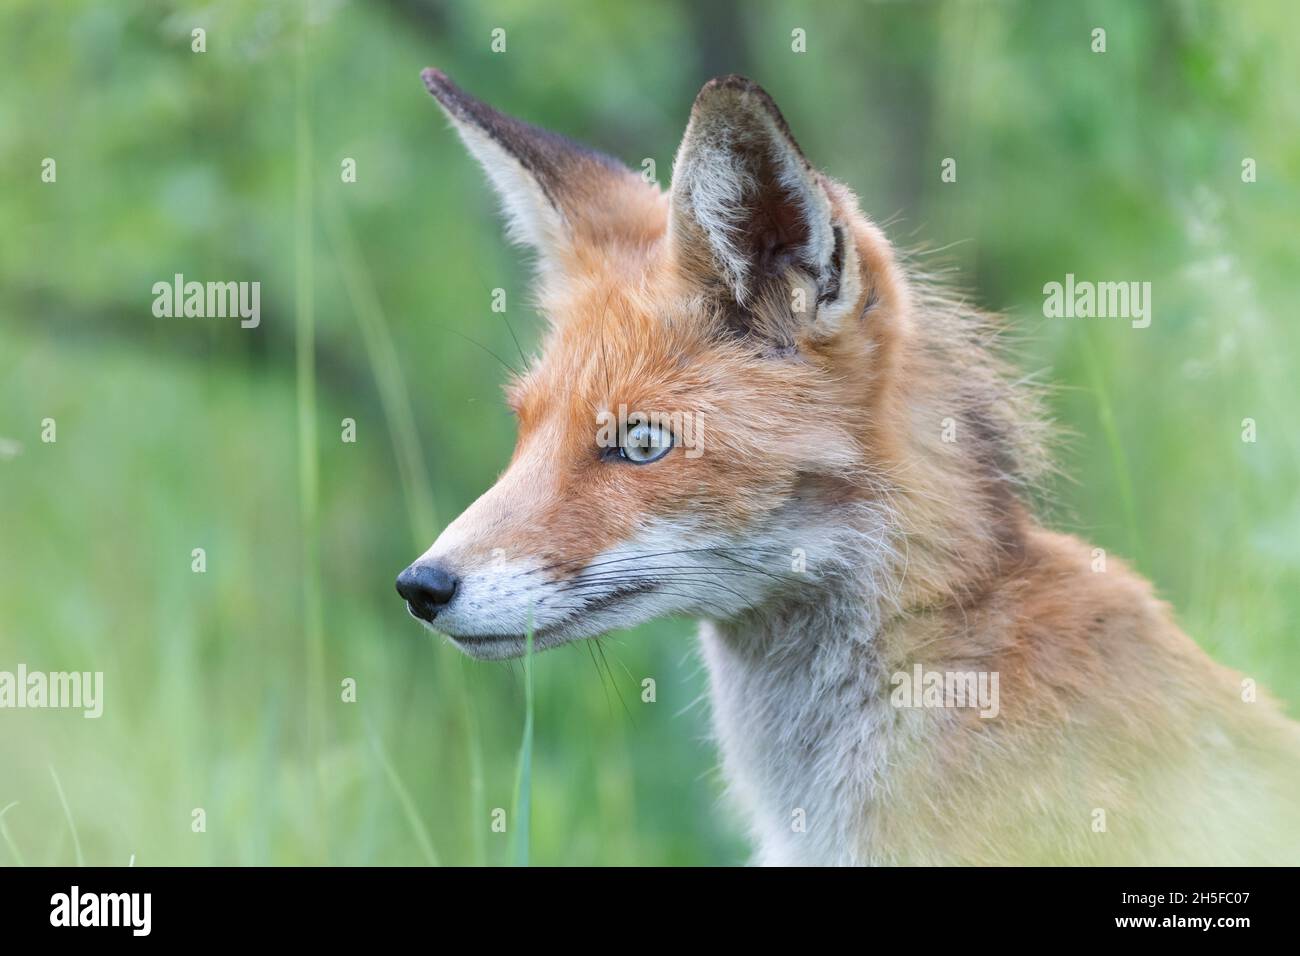 Head of a red fox Vulpes vulpes on a green background. Stock Photo